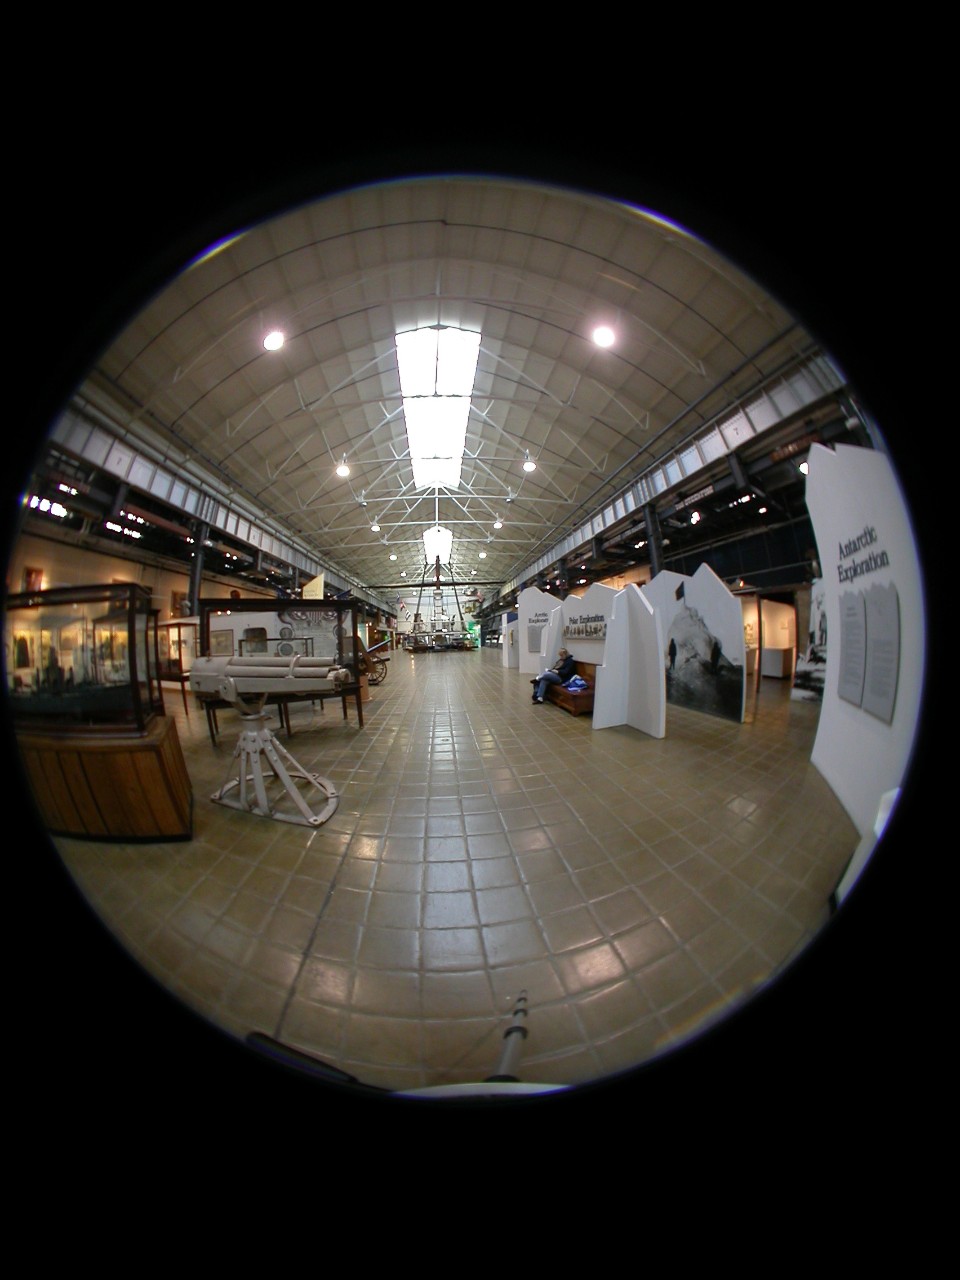 NMUSN-5238 (Color):   Fish Eye View of the Navy Museum, April 2004.    View shows the Polar Exploration and Navigation areas of the museum.   These were both dismantled during the 2018-2020 time-frame to make way for new exhibits for the New National Museum of the U.S. Navy.   National Museum of the U.S. Navy Photograph Collection.   